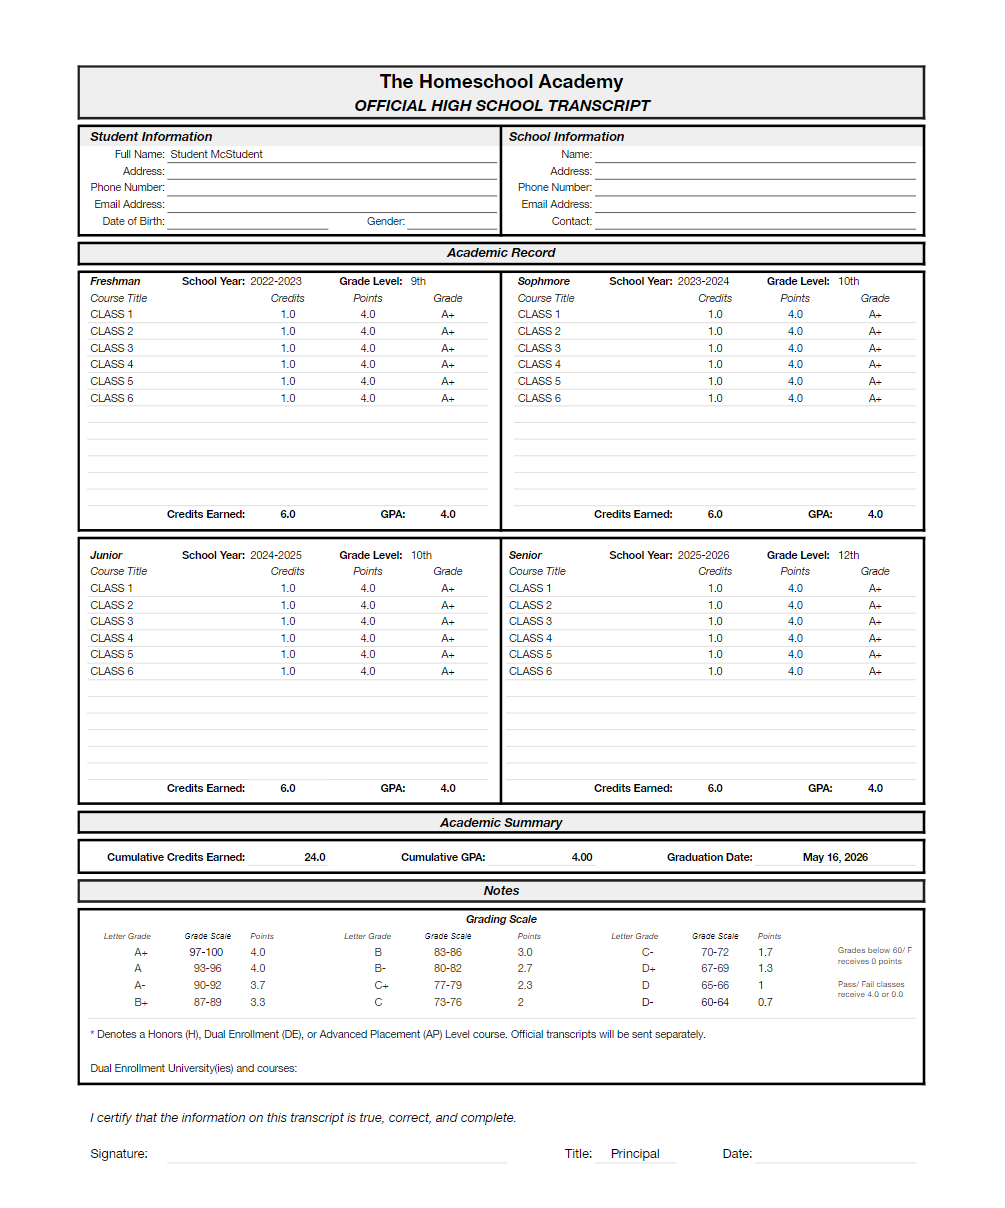 Homeschool High School Transcript Template | Automatically calculate GPA and autofill the transcript from included Gradebooks